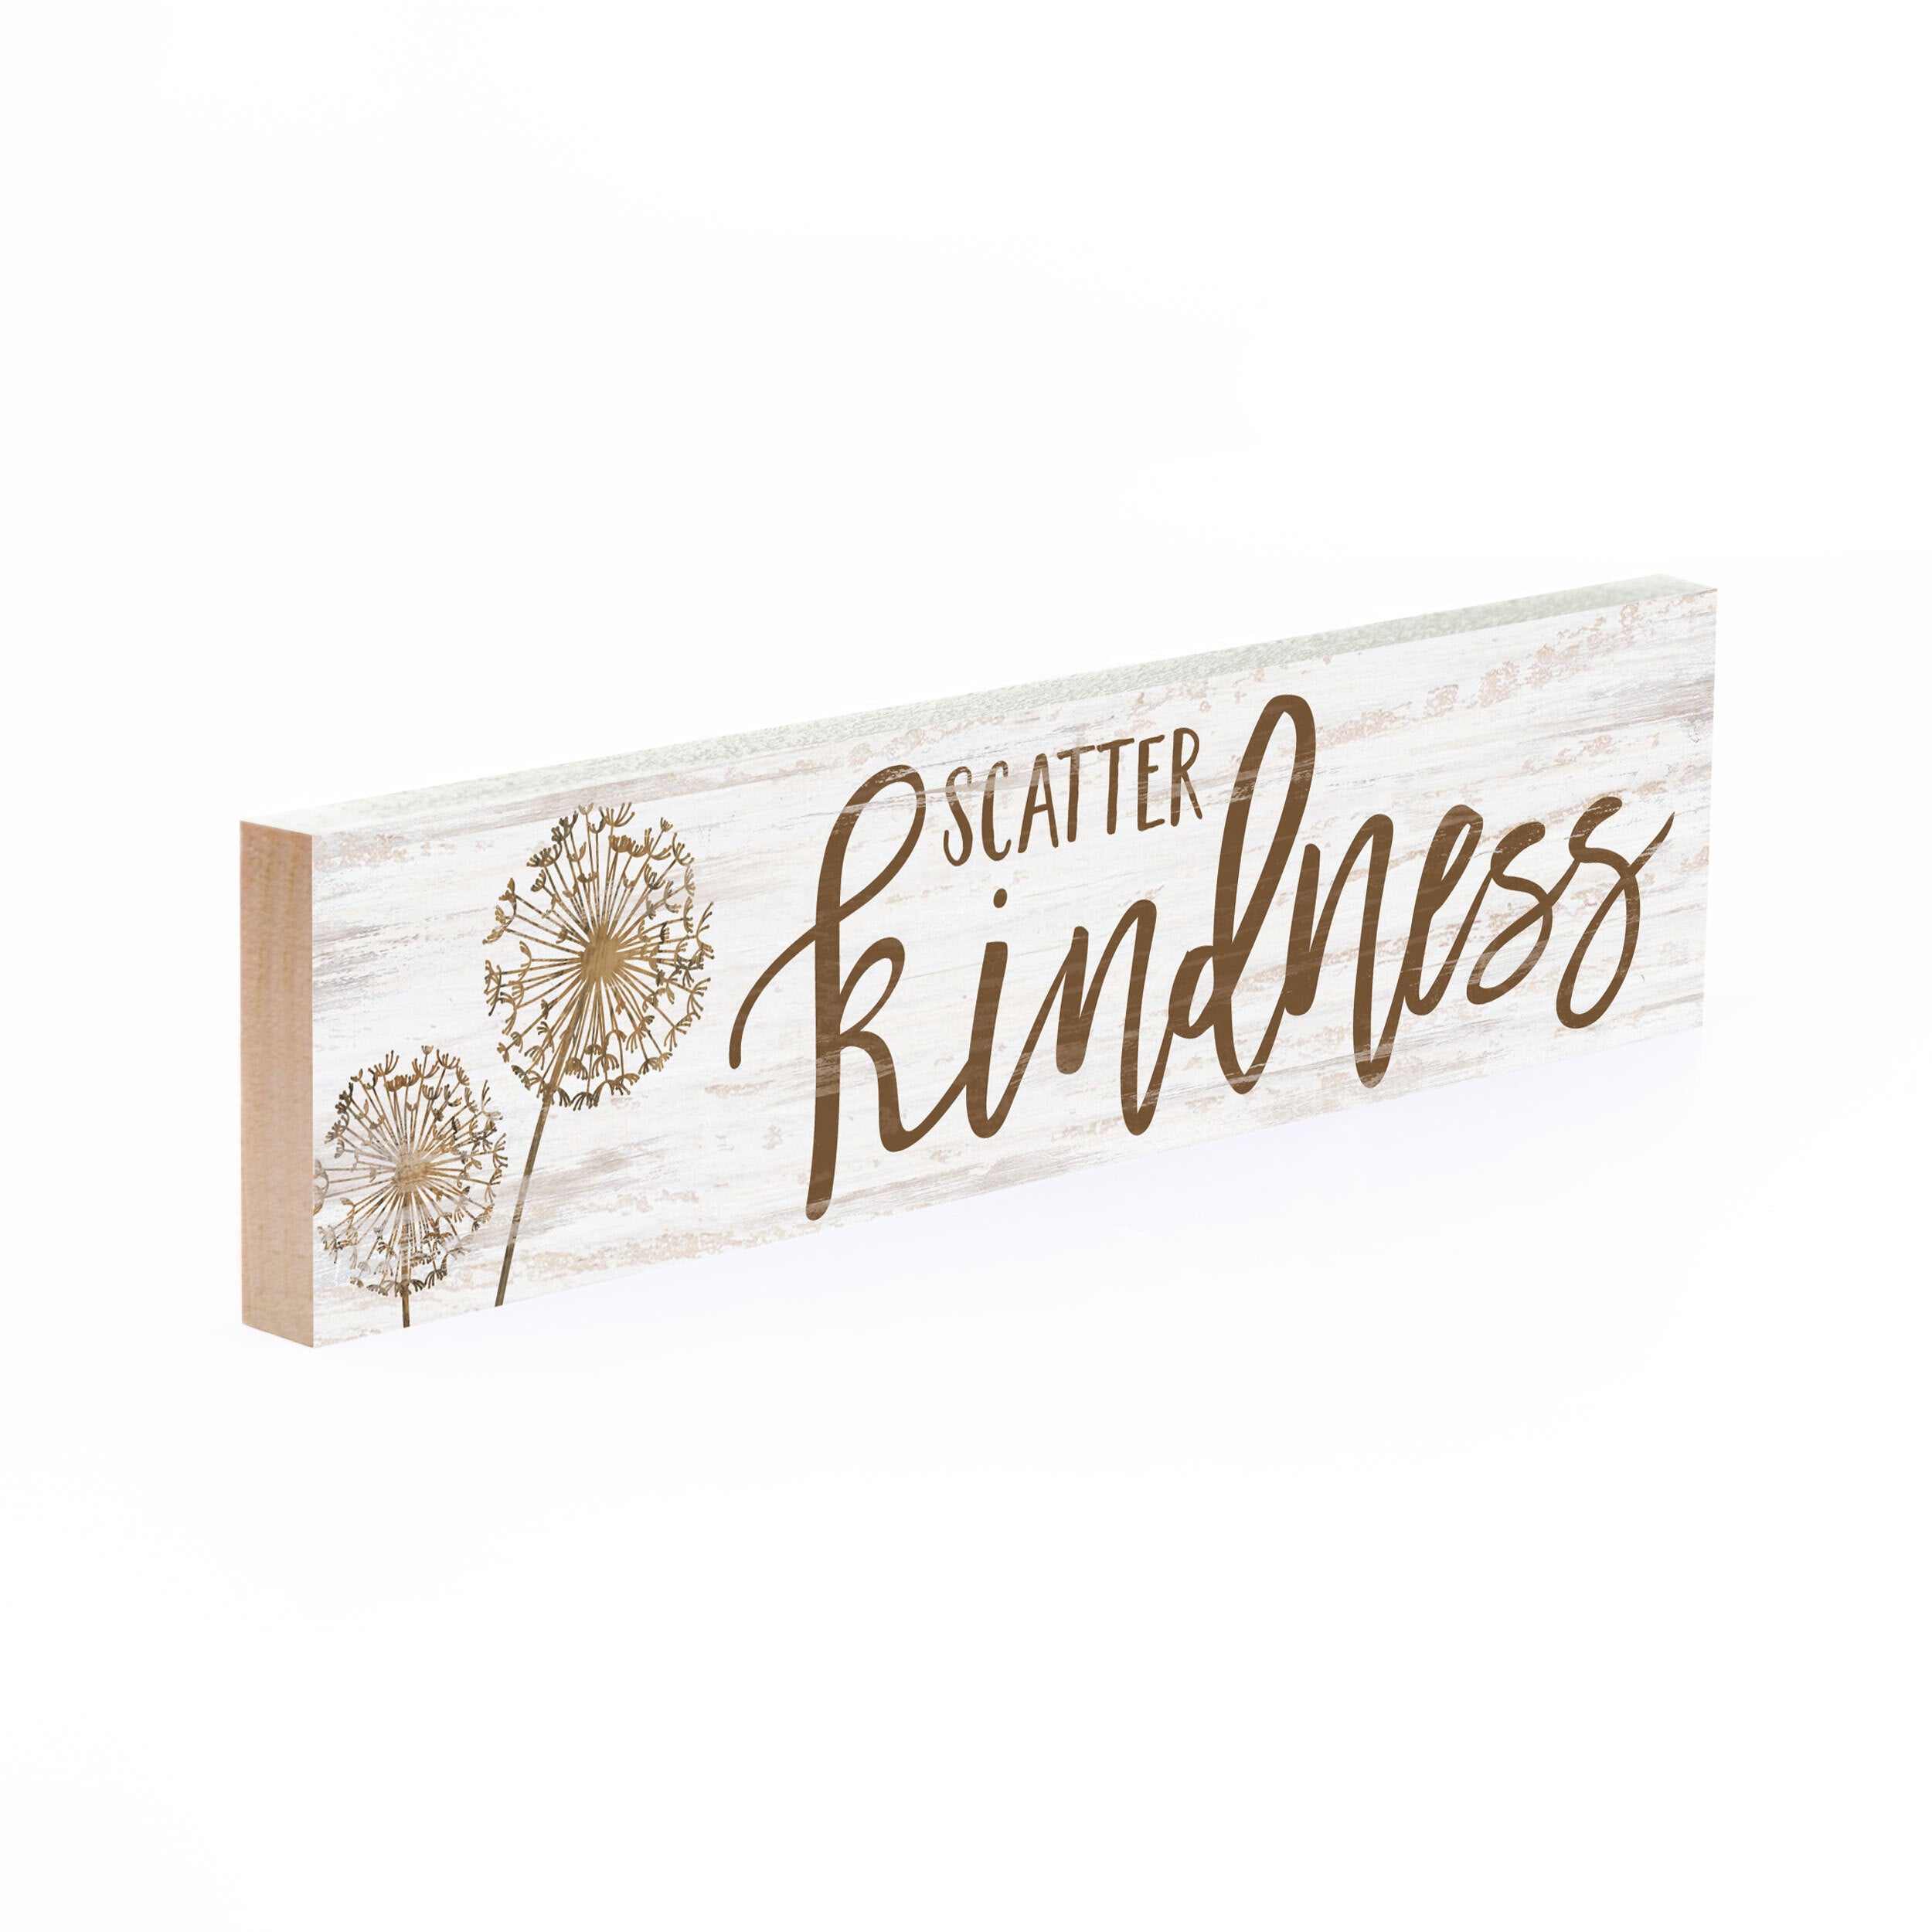 Scatter Kindness Small Sign